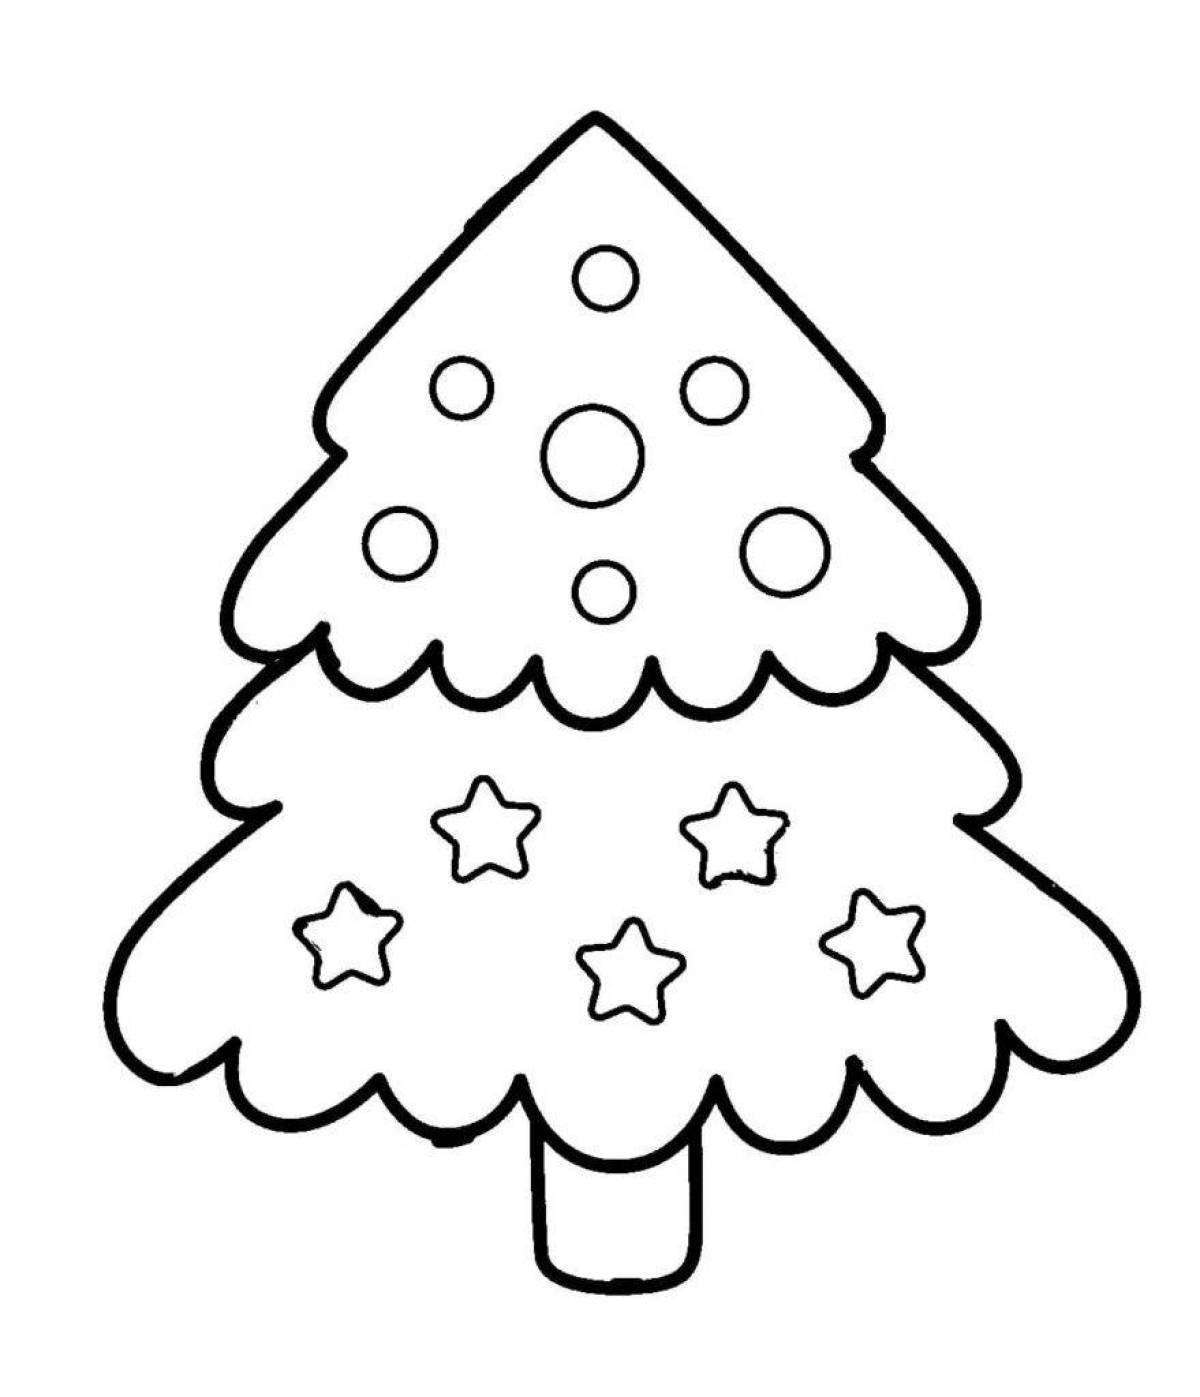 Bright Christmas tree coloring for children 3-4 years old